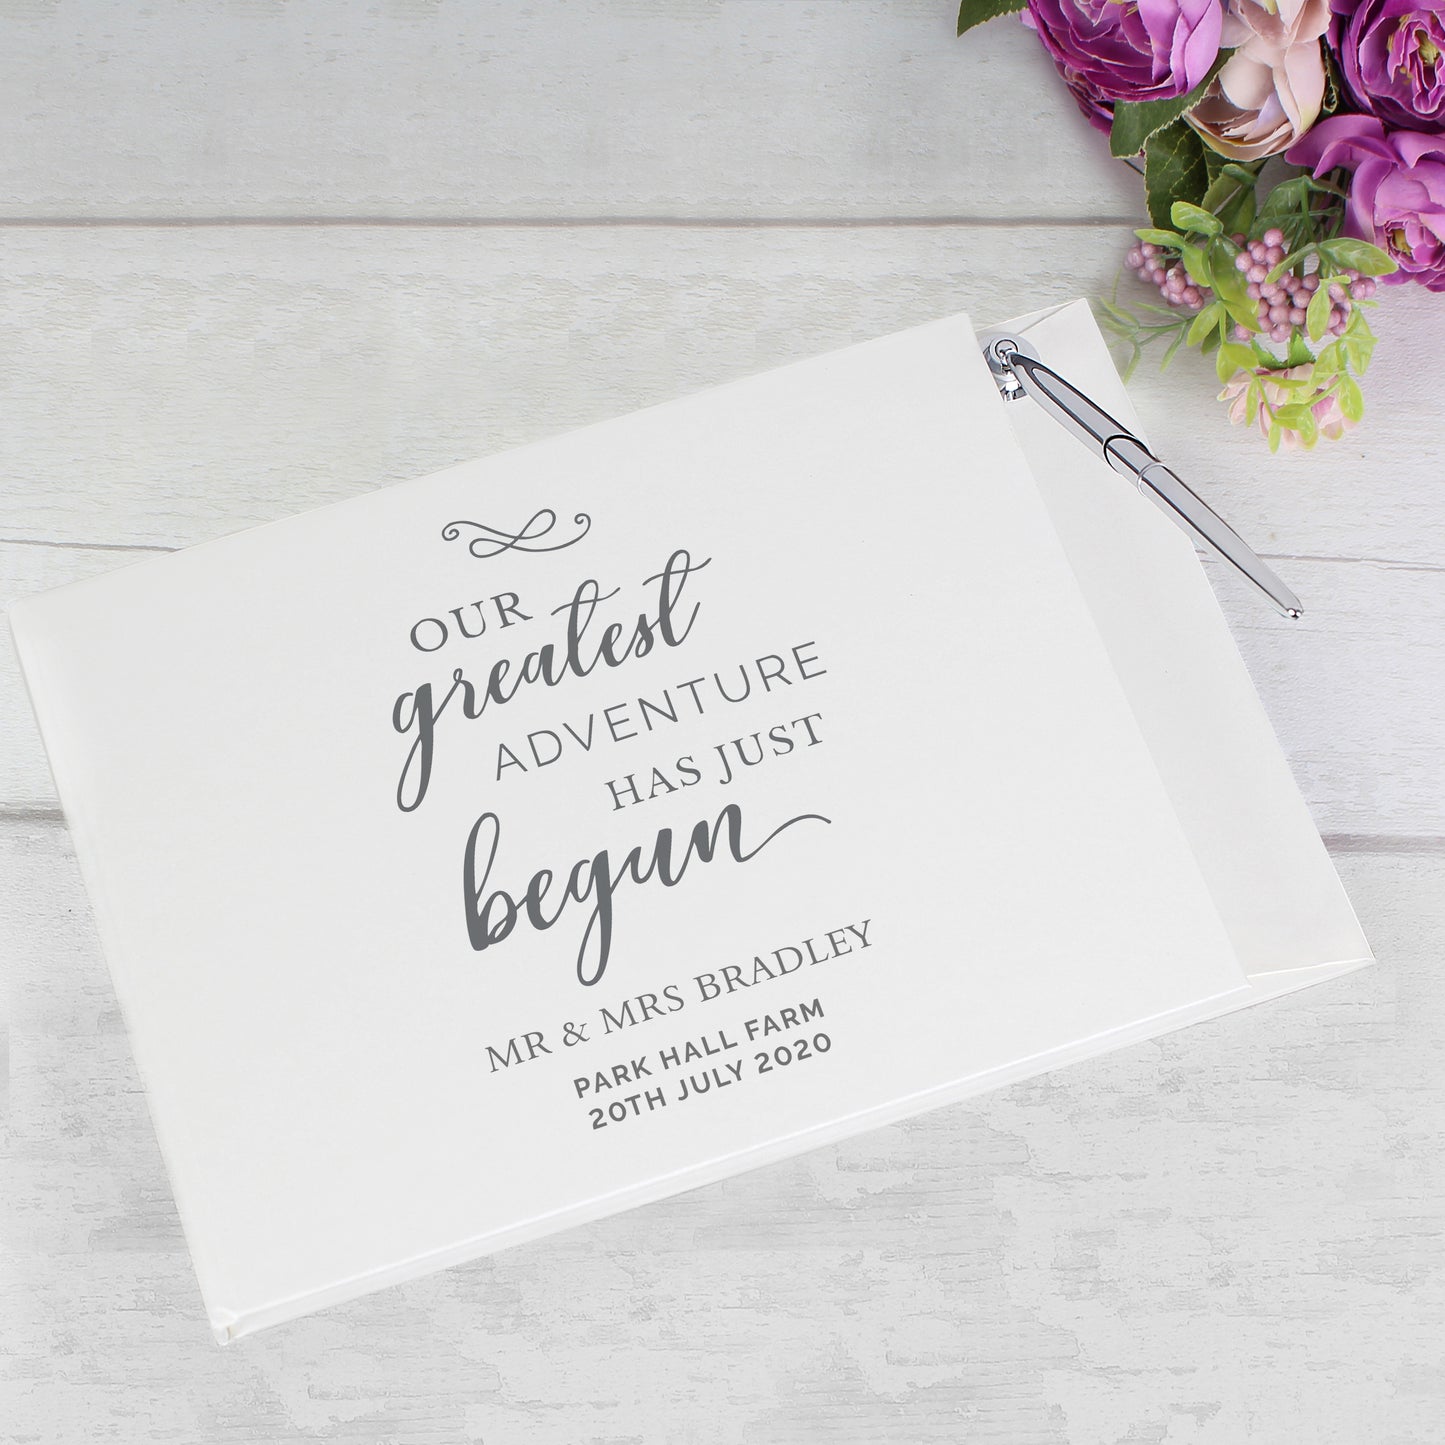 Our Greatest Adventure has just Begun, personalised wedding guest book